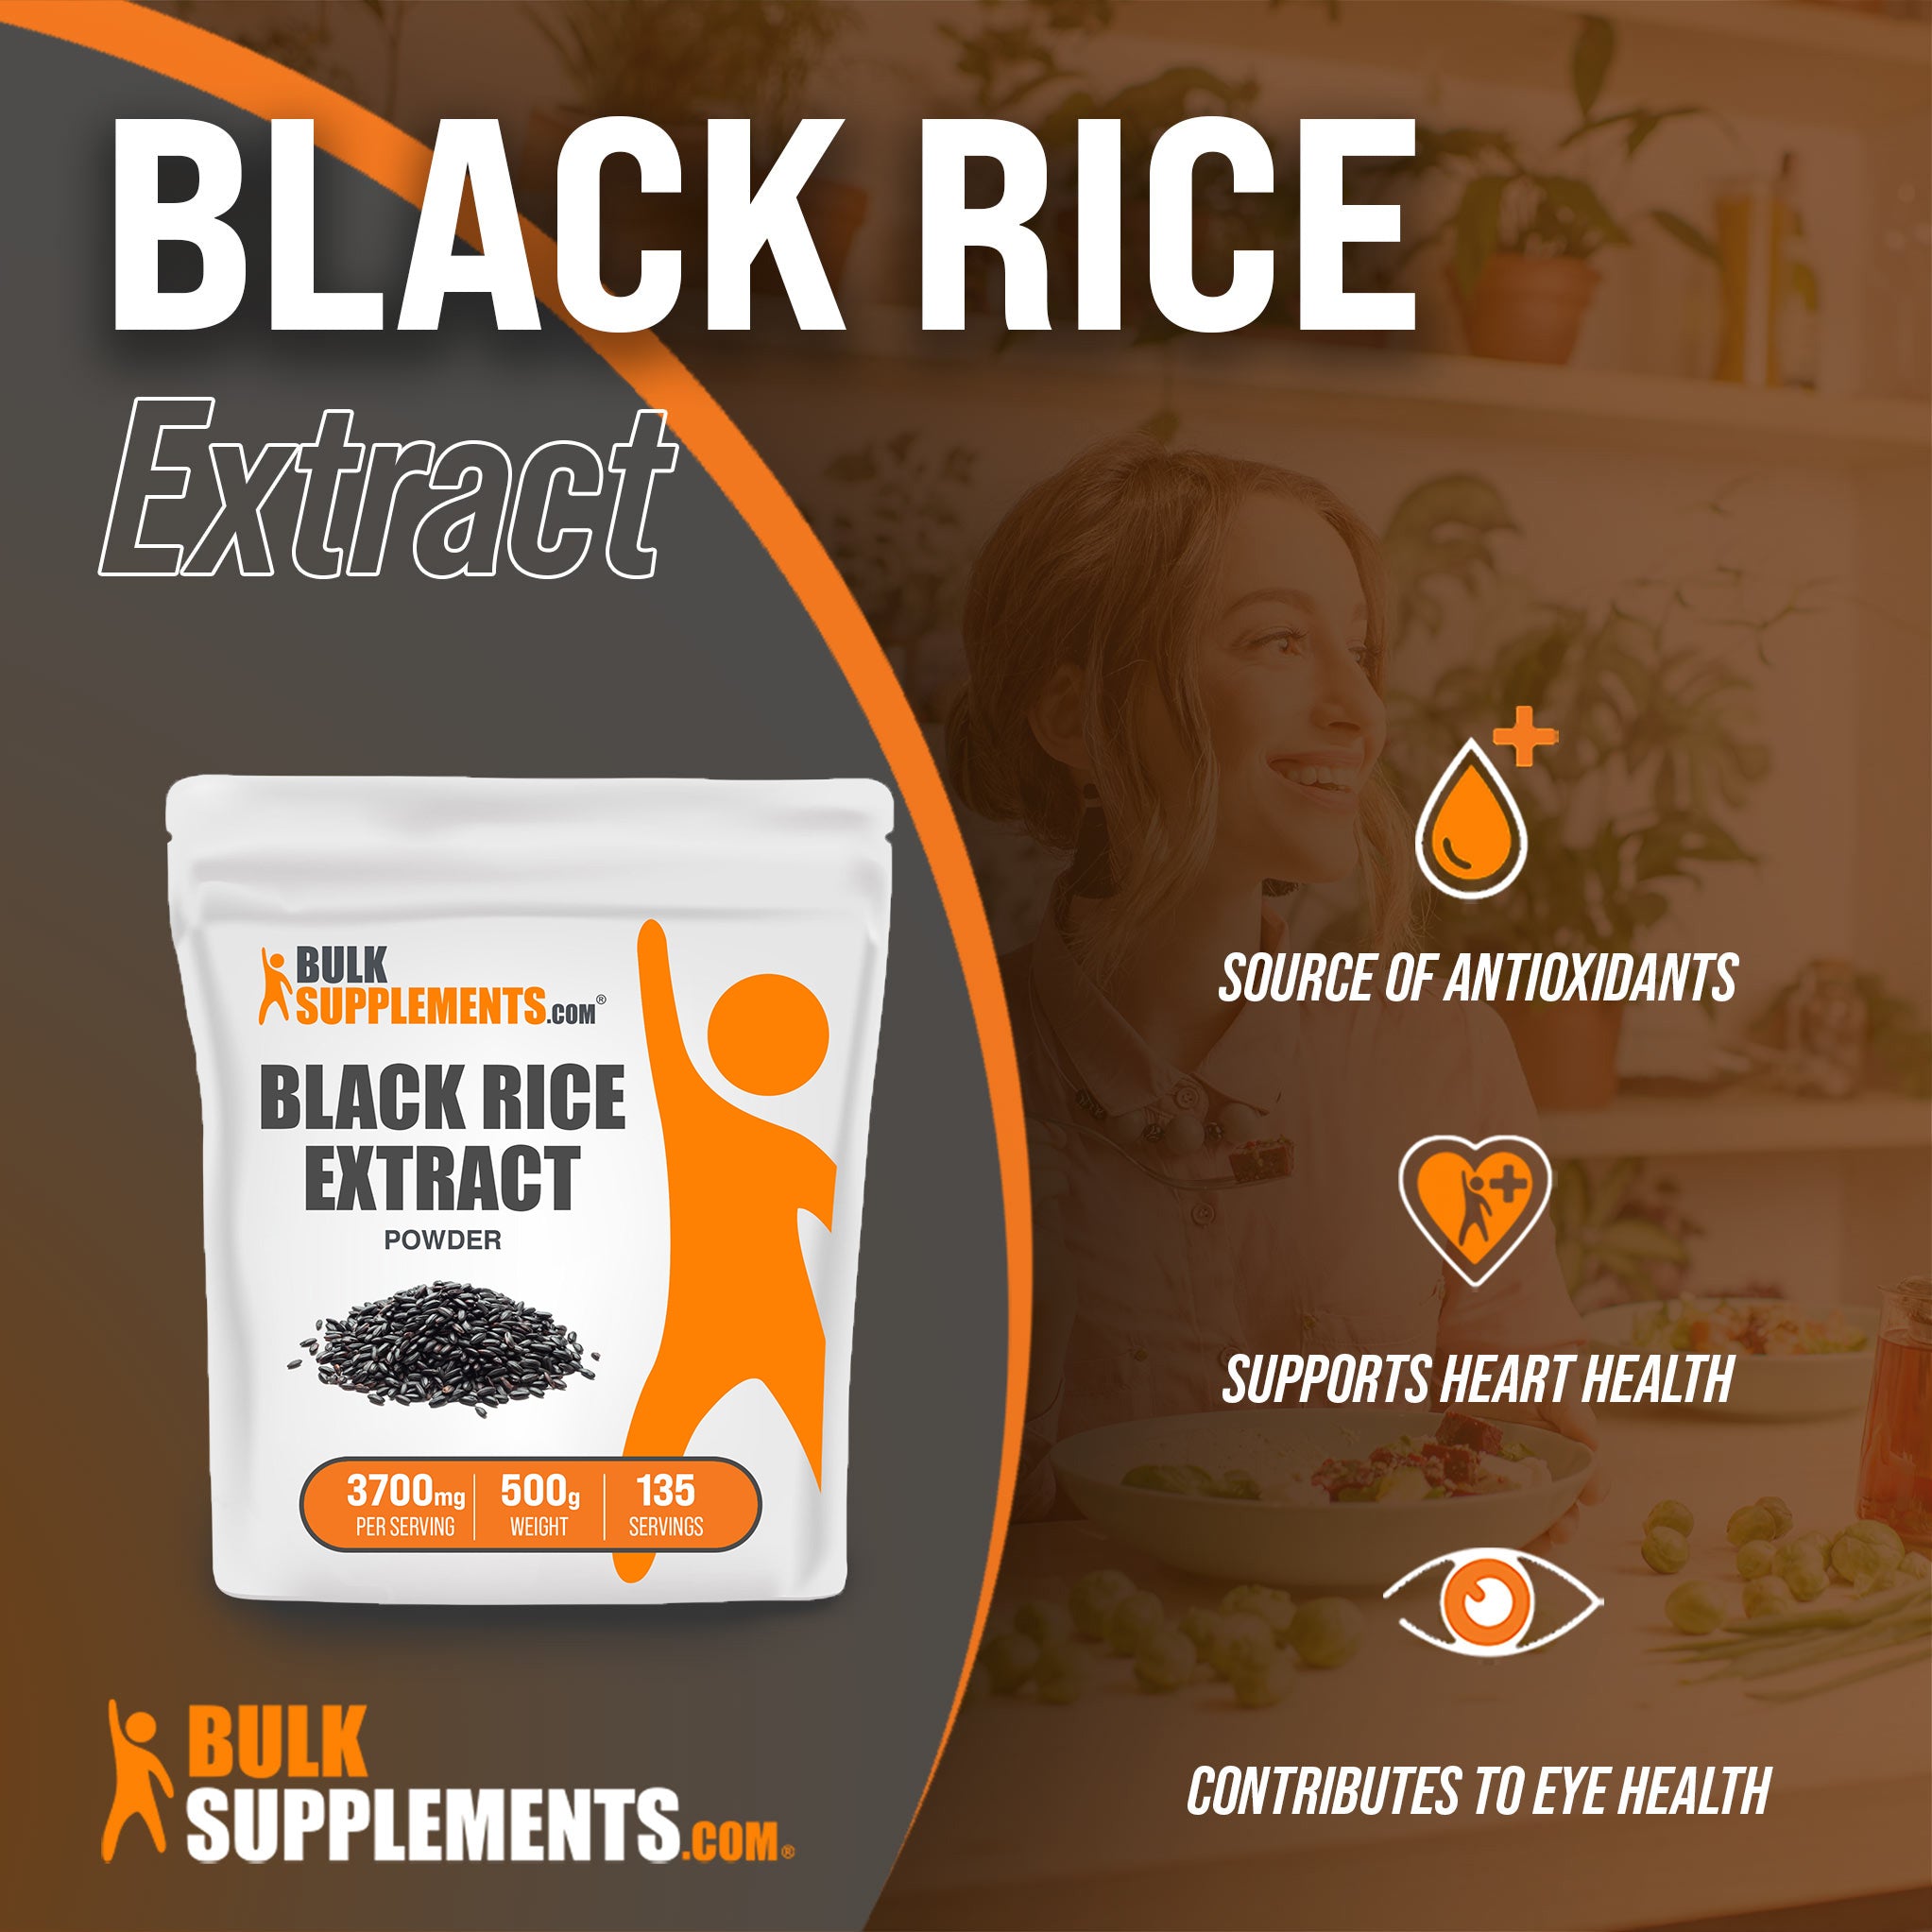 Benefits of Black Rice Extract; source of antioxidants, supports heart health, contributes to eye health